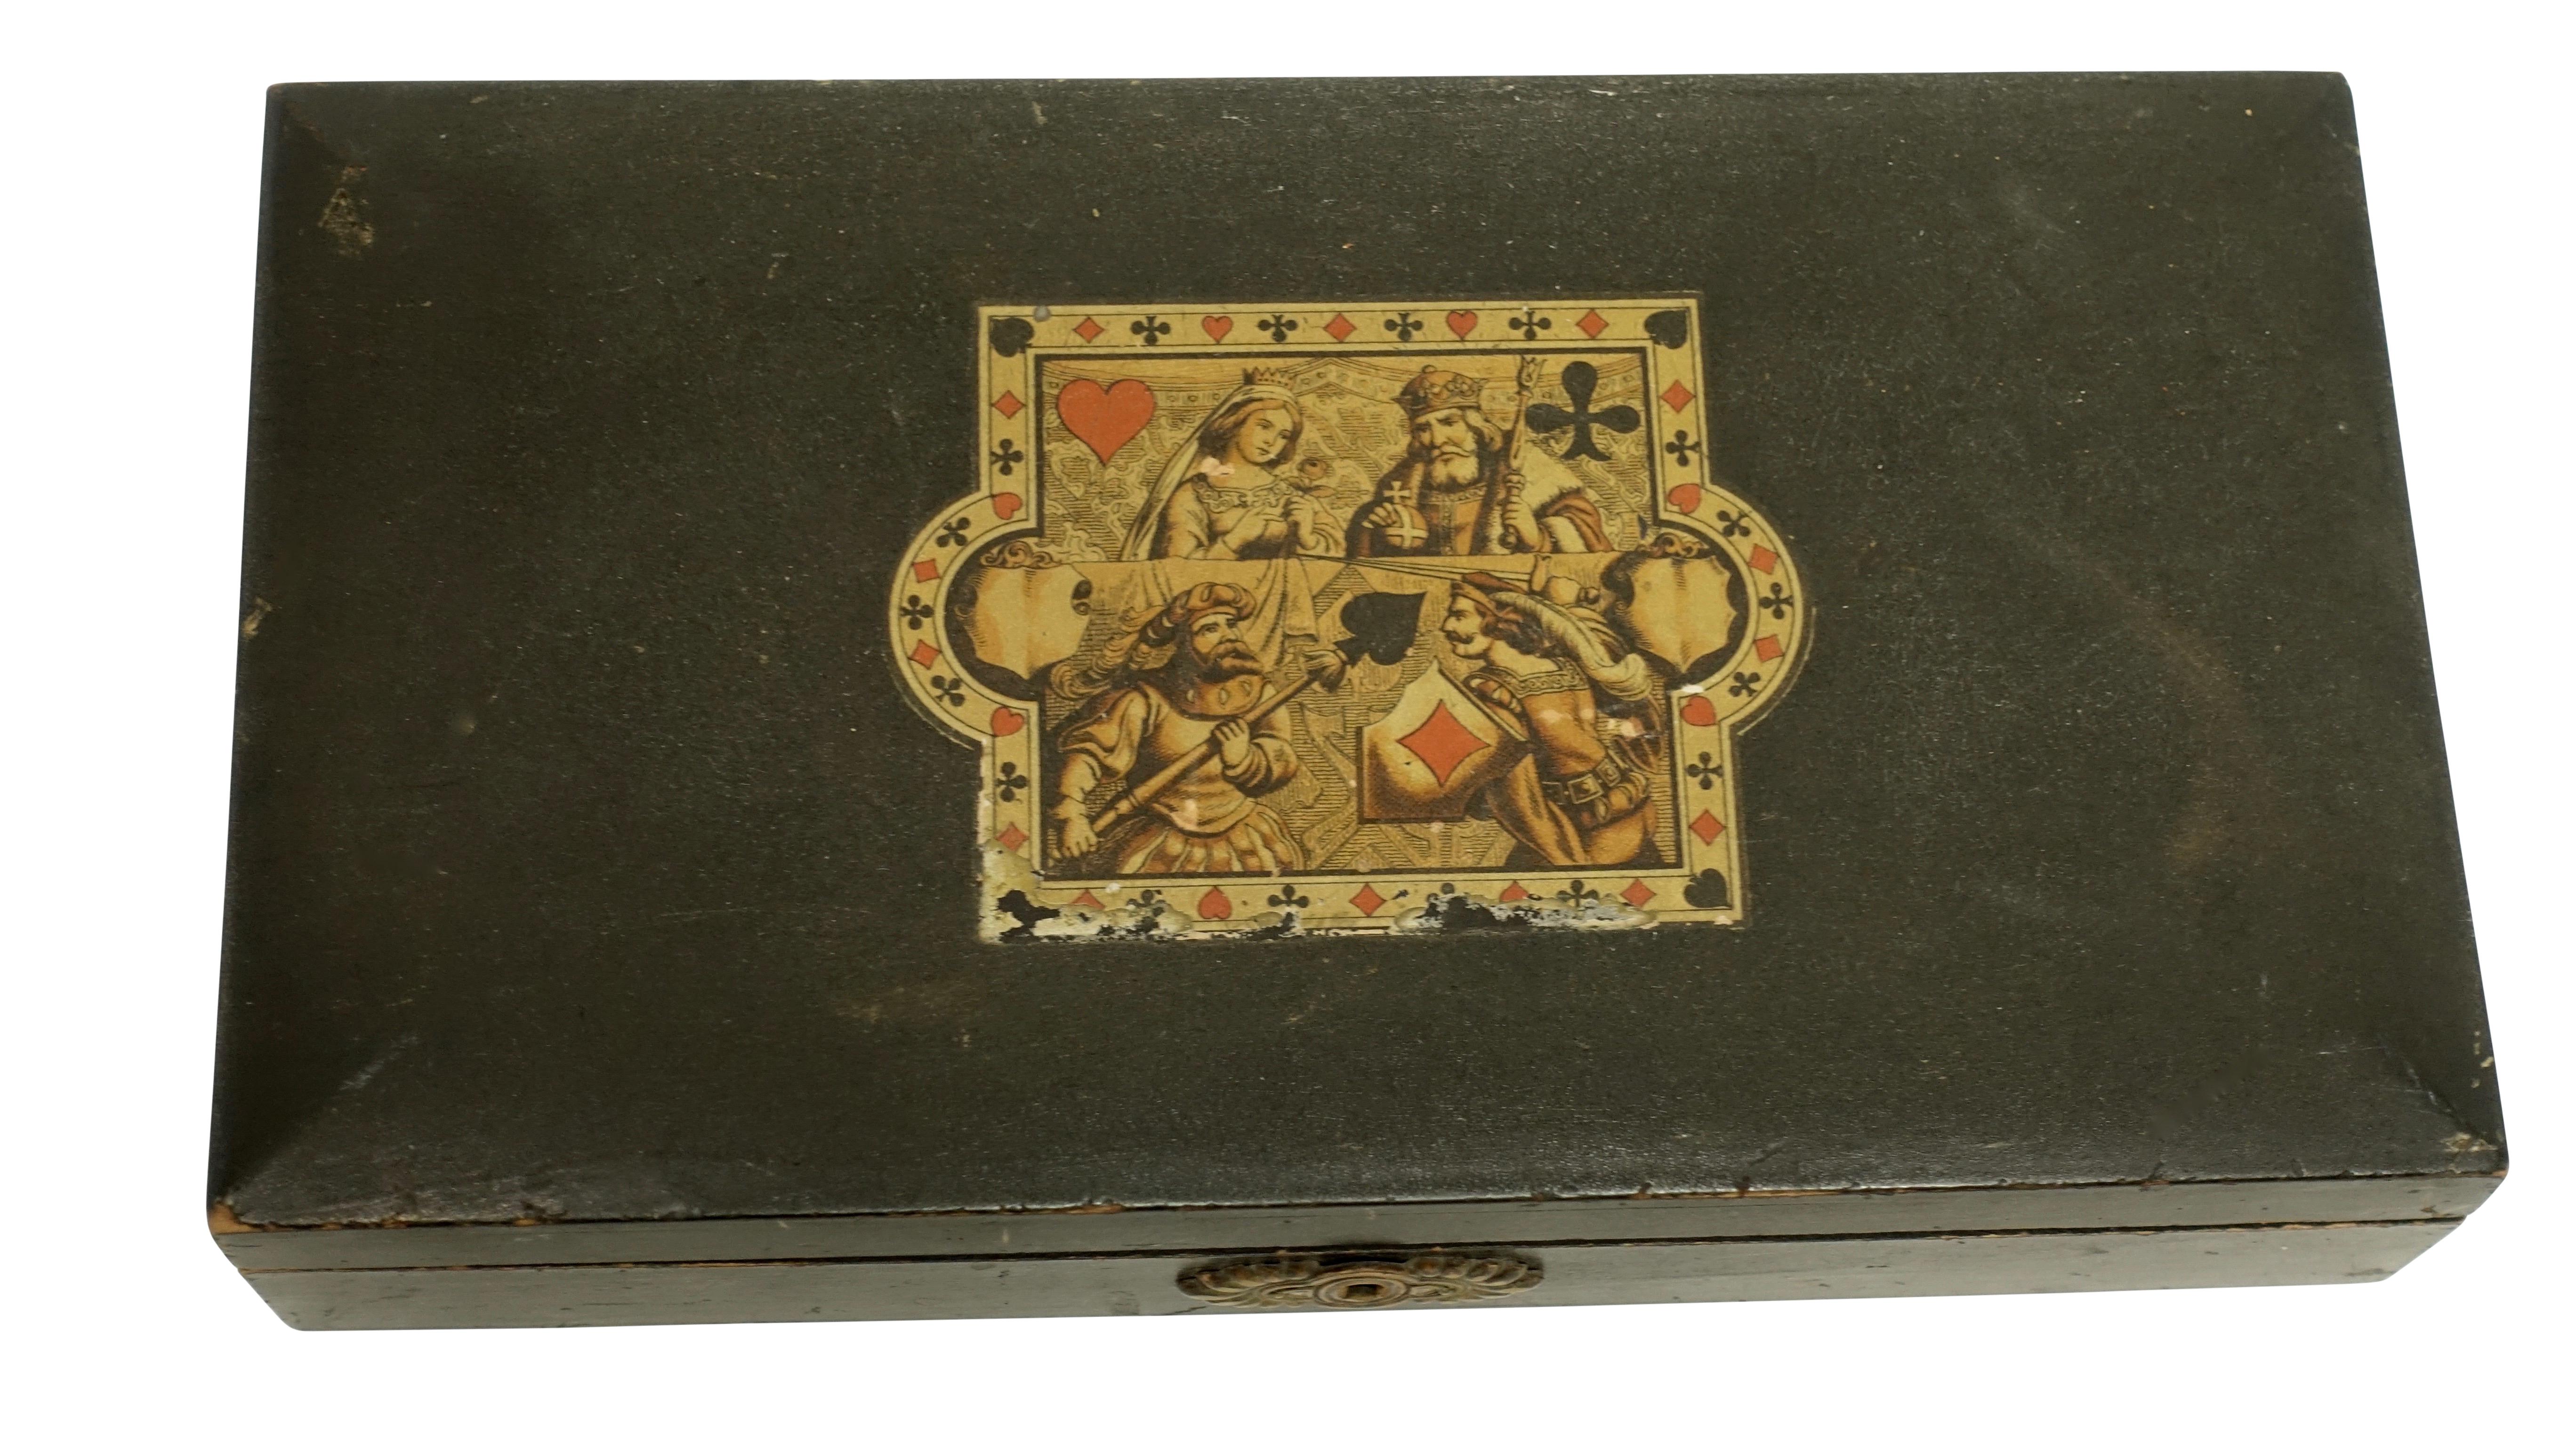 Lacquer and stenciled game box, having four fitted boxes inside with gaming pieces and two decks of hand colored playing cards, one deck with 41 cards and the other with 50. Overall in very good condition. European 19th century.